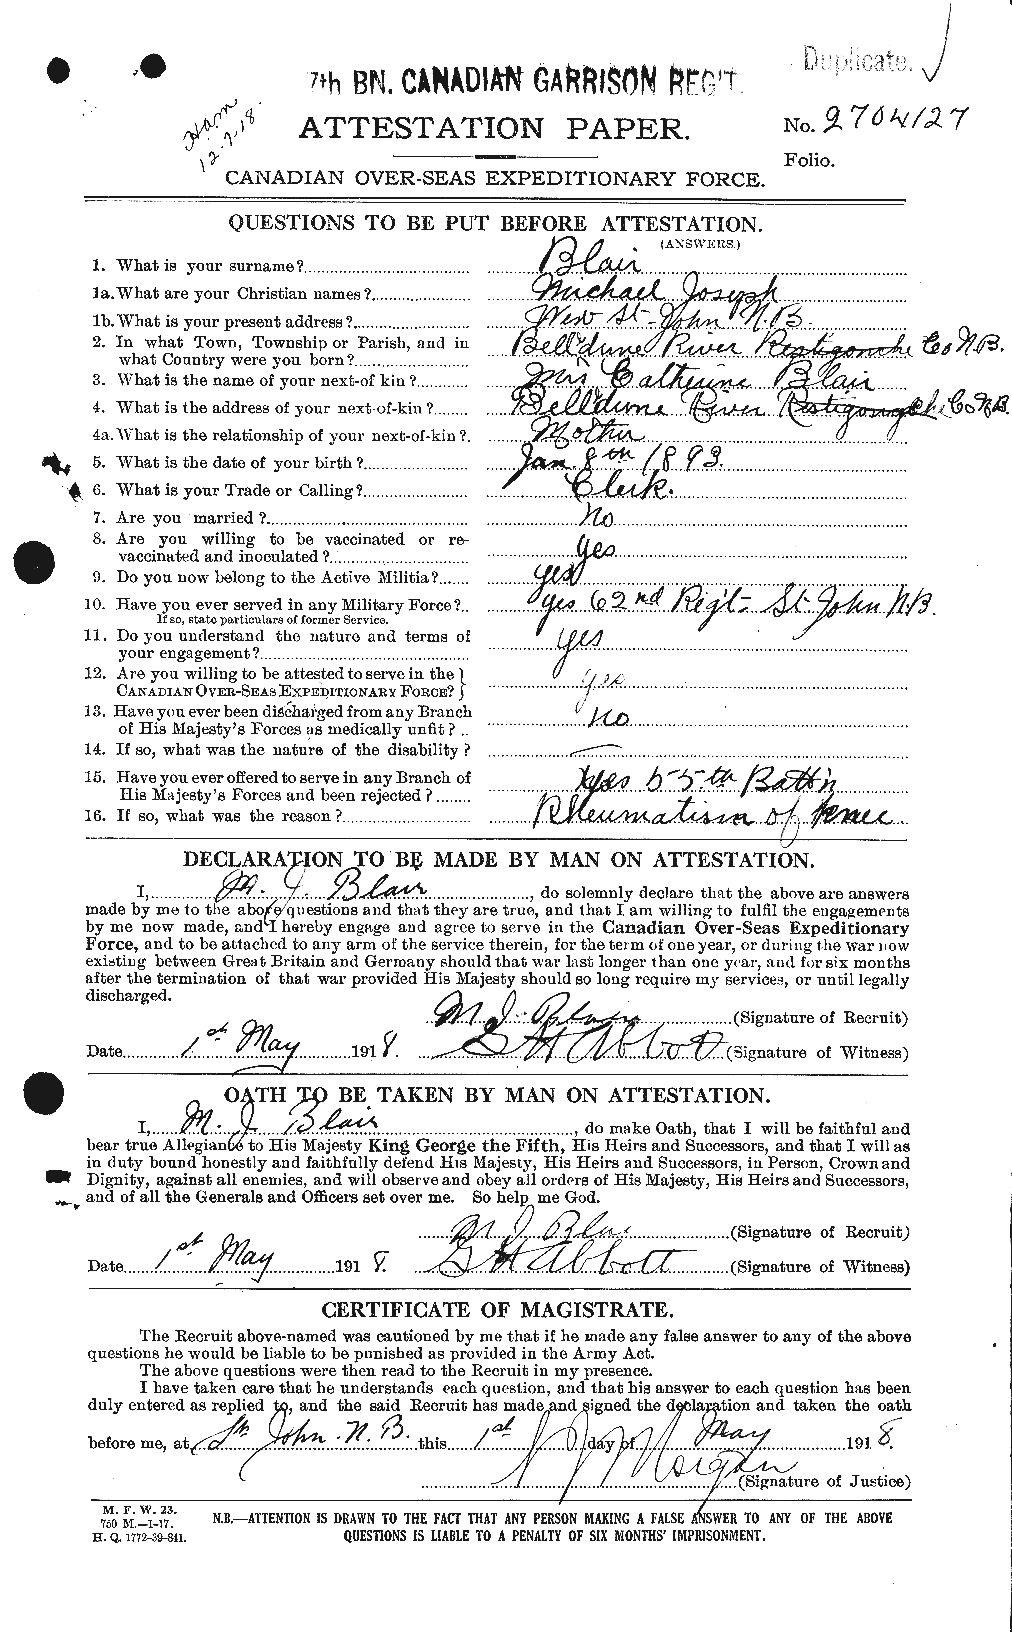 Personnel Records of the First World War - CEF 243119a